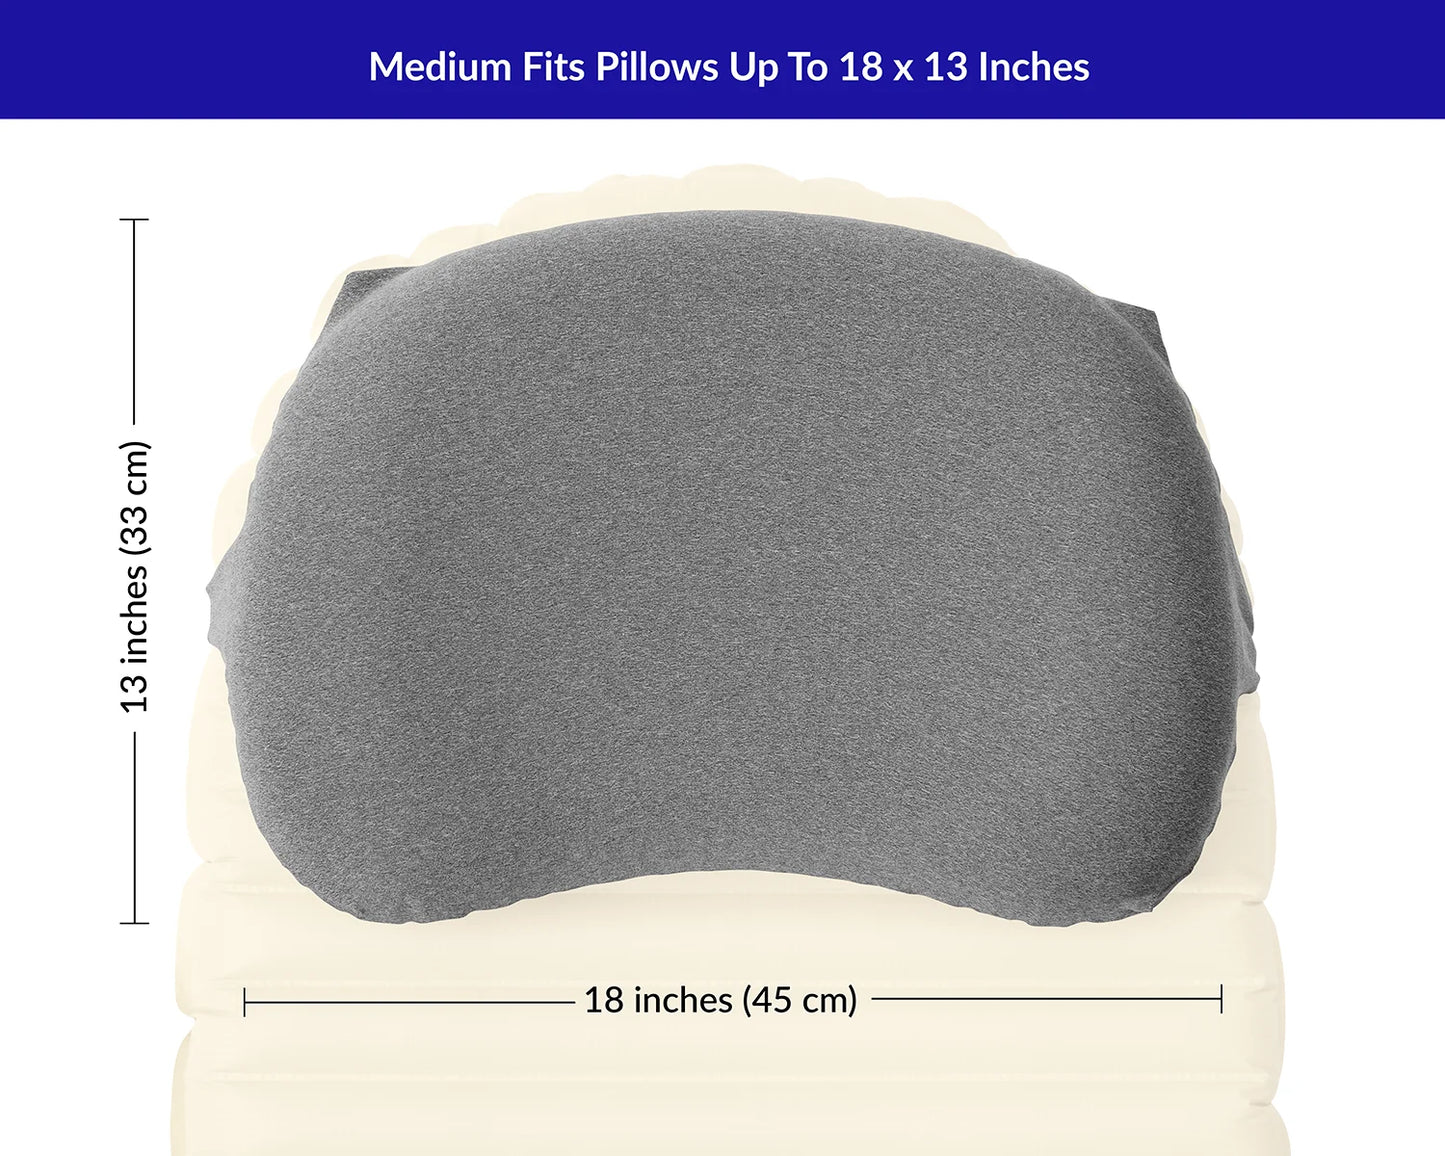 Medium size measurements graphic. Fits up to a 18x13 inch inflatable camping pillow.